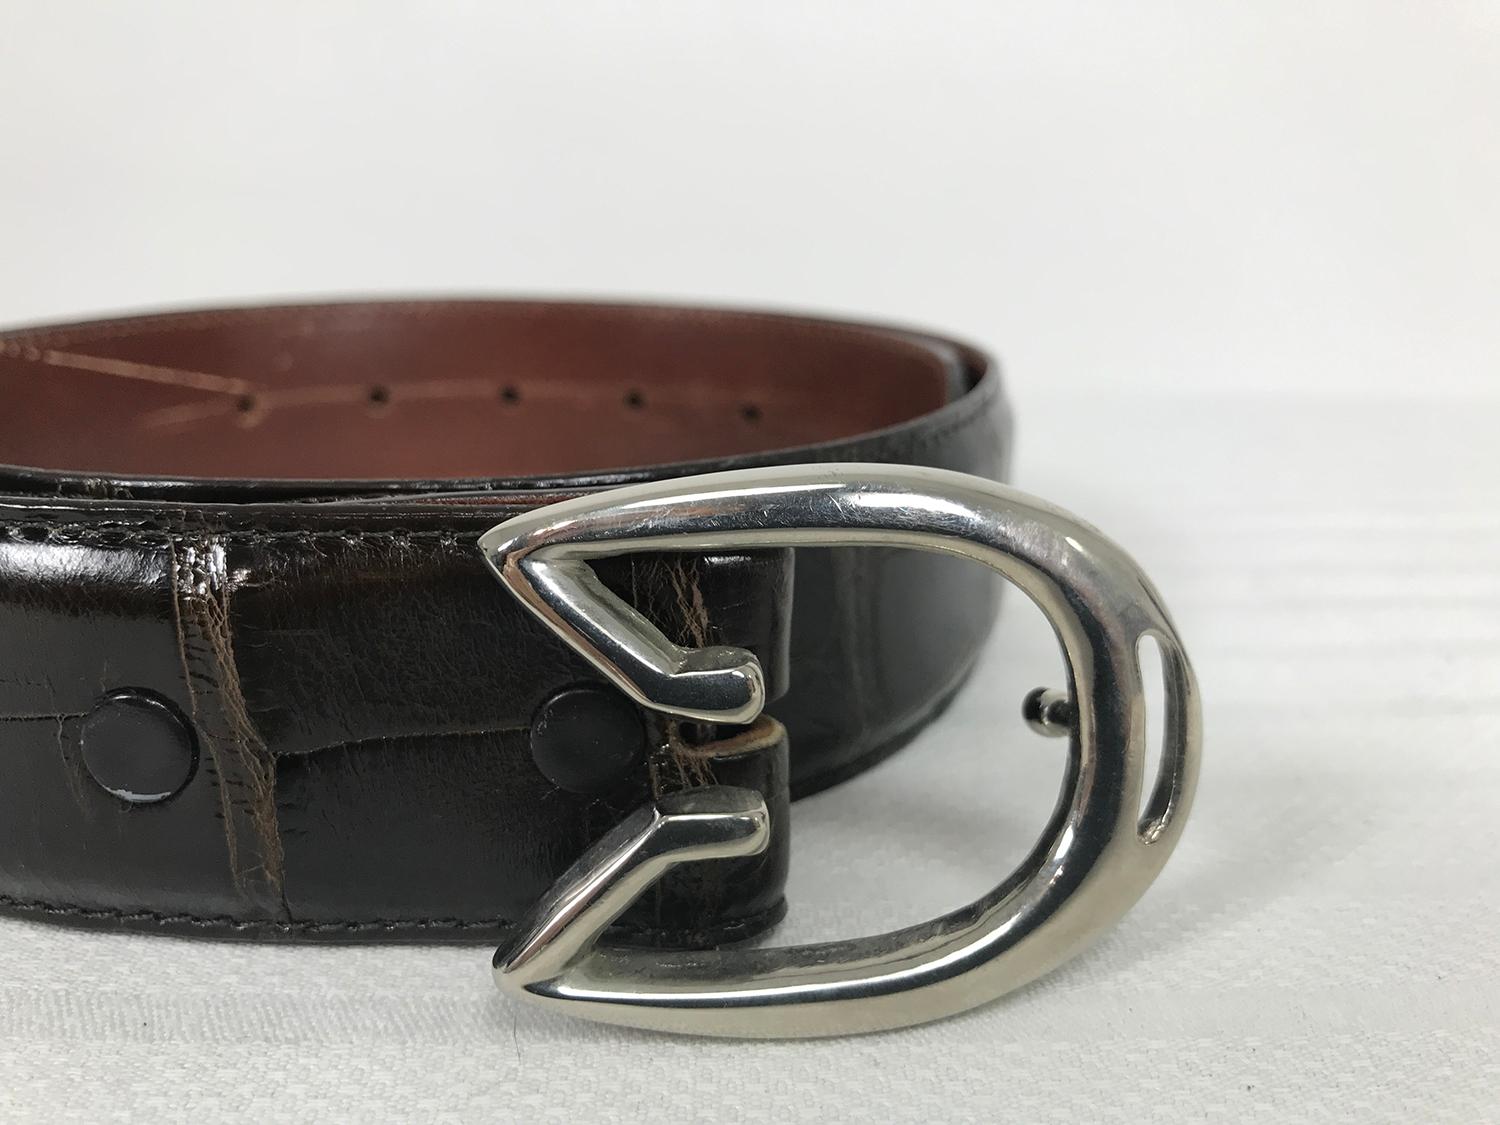 Vintage G Gucci modernist silver horseshoe buckle, with wide brown alligator belt. This buckle can be removed via snaps and added to other straps. Stylize buckle with prong end has a sleek modern look. The buckle is in very good condition, marked G